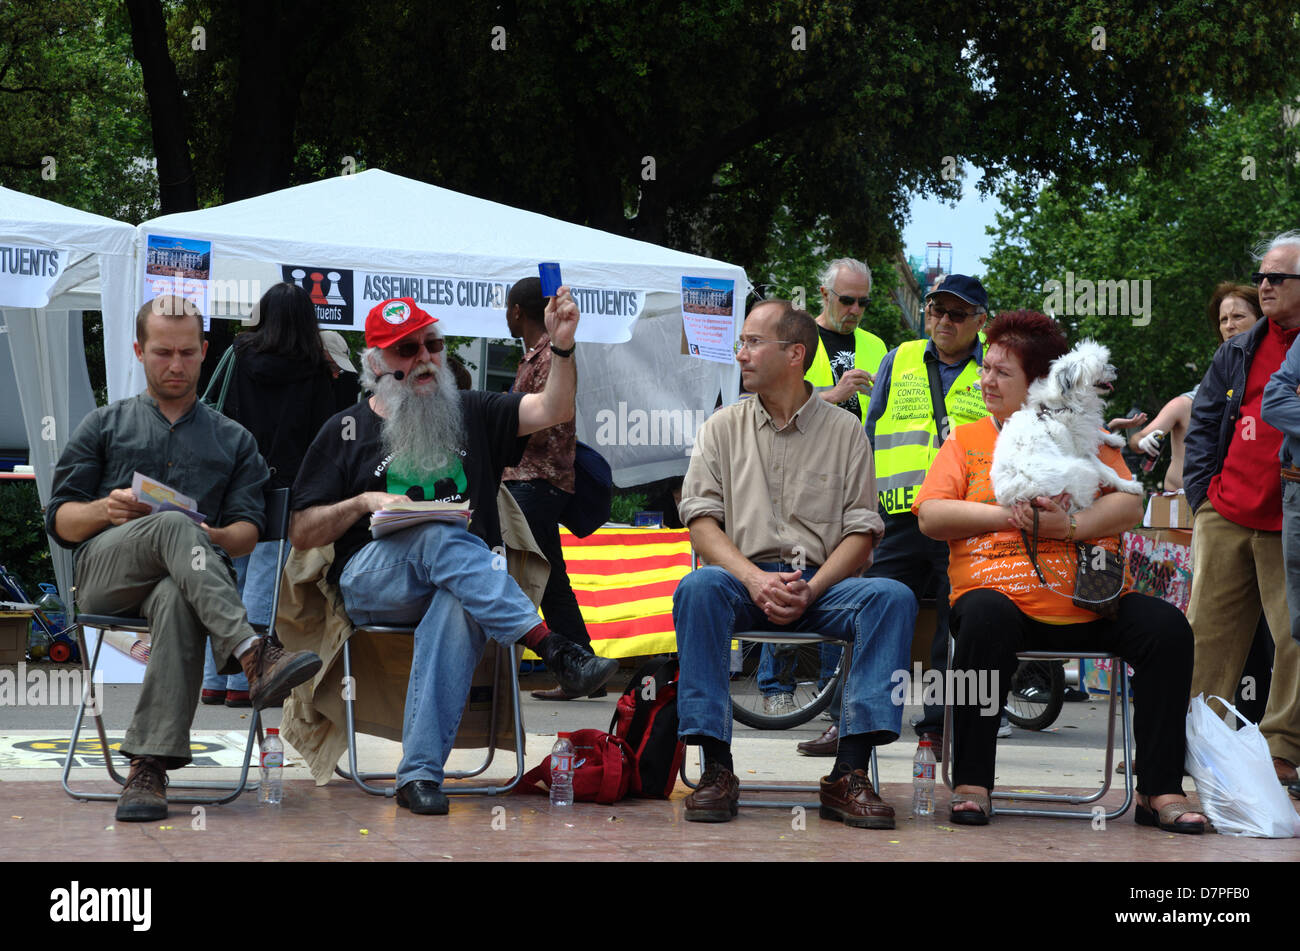 Barcelona, Spain. 12th May 2013. Second anniversary of '15-M' (15th May 2010) when Catalunya square of Barcelona was occupied by 'indignados' (people against budget cuts). This evening would be a great demonstration in the streets. In the image, speakers from left to right: Marco Aparicio (professor of constitutional law), Víctor Ríos (historian), Manel Montsonís (constituent) and woman with a dog. Fco Javier Rivas Martín/Alamy Live News Stock Photo